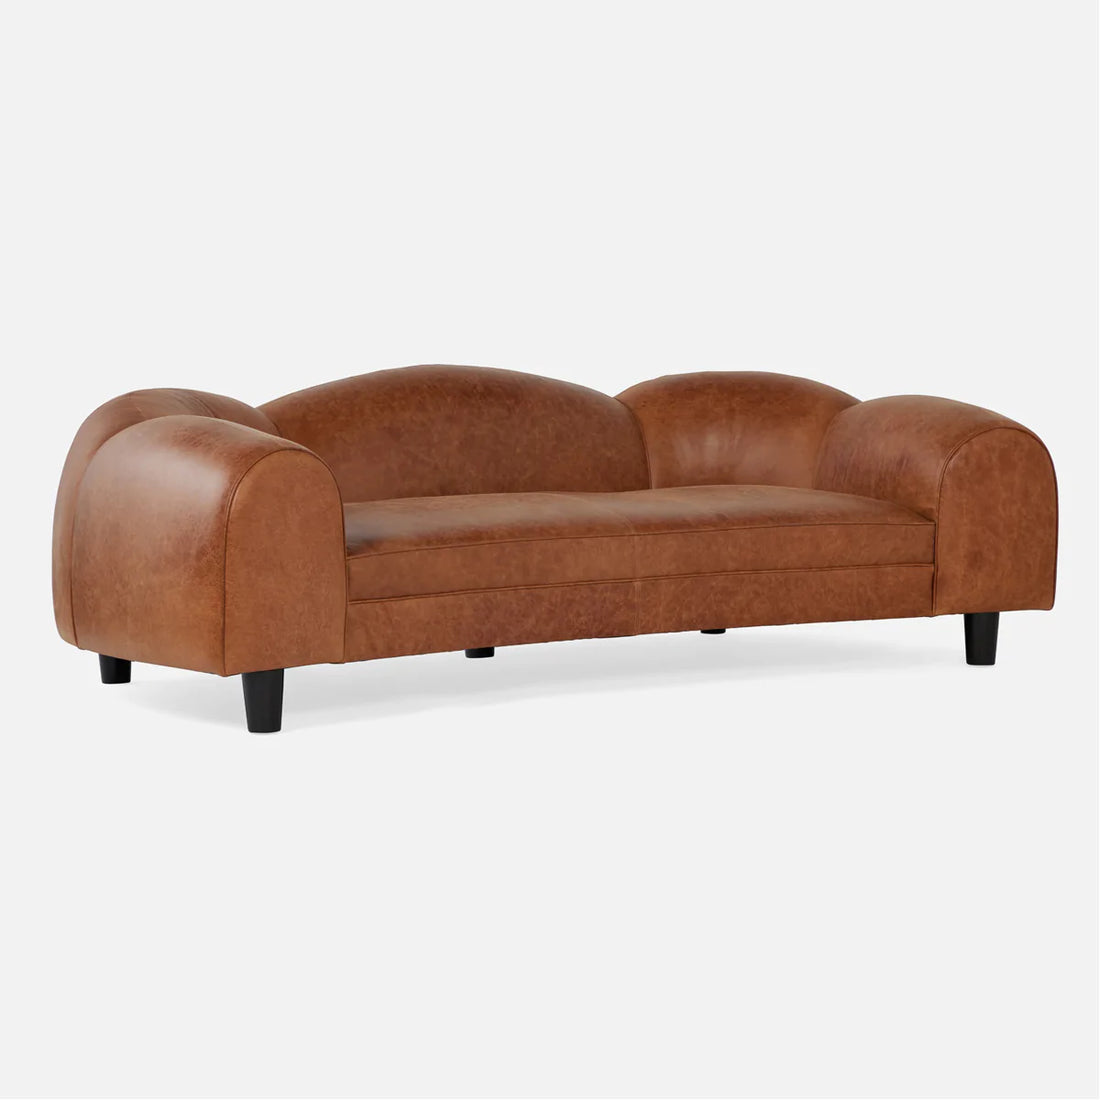 Made Goods Caldwell Scalloped Leather Sofa in Clyde Fabric